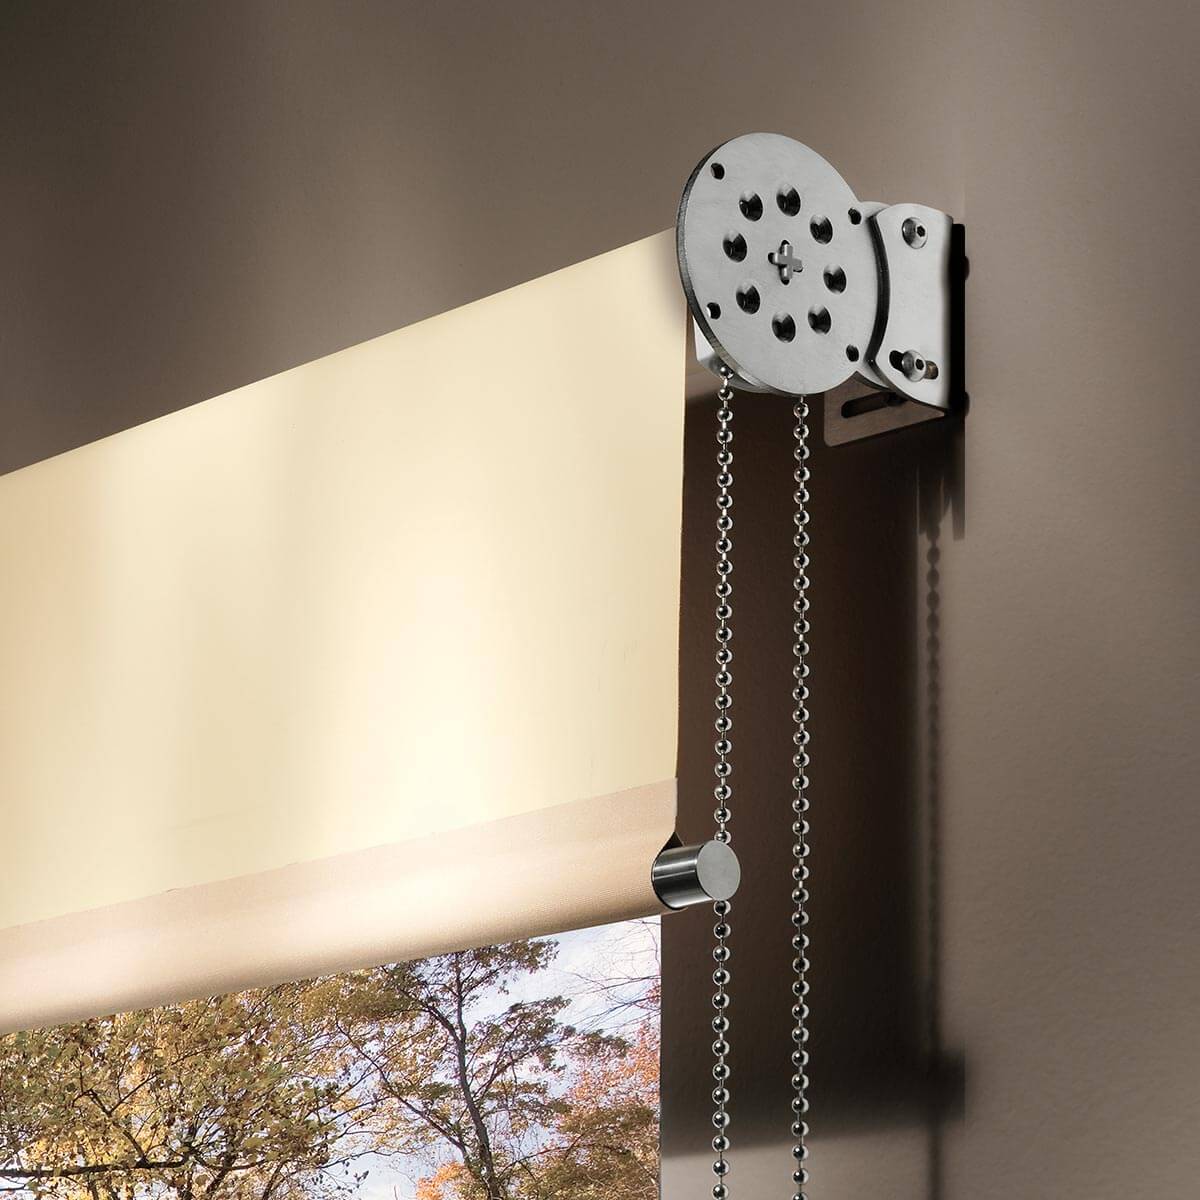 Chain-operated roller blind, Large , Free hanging. Pronema